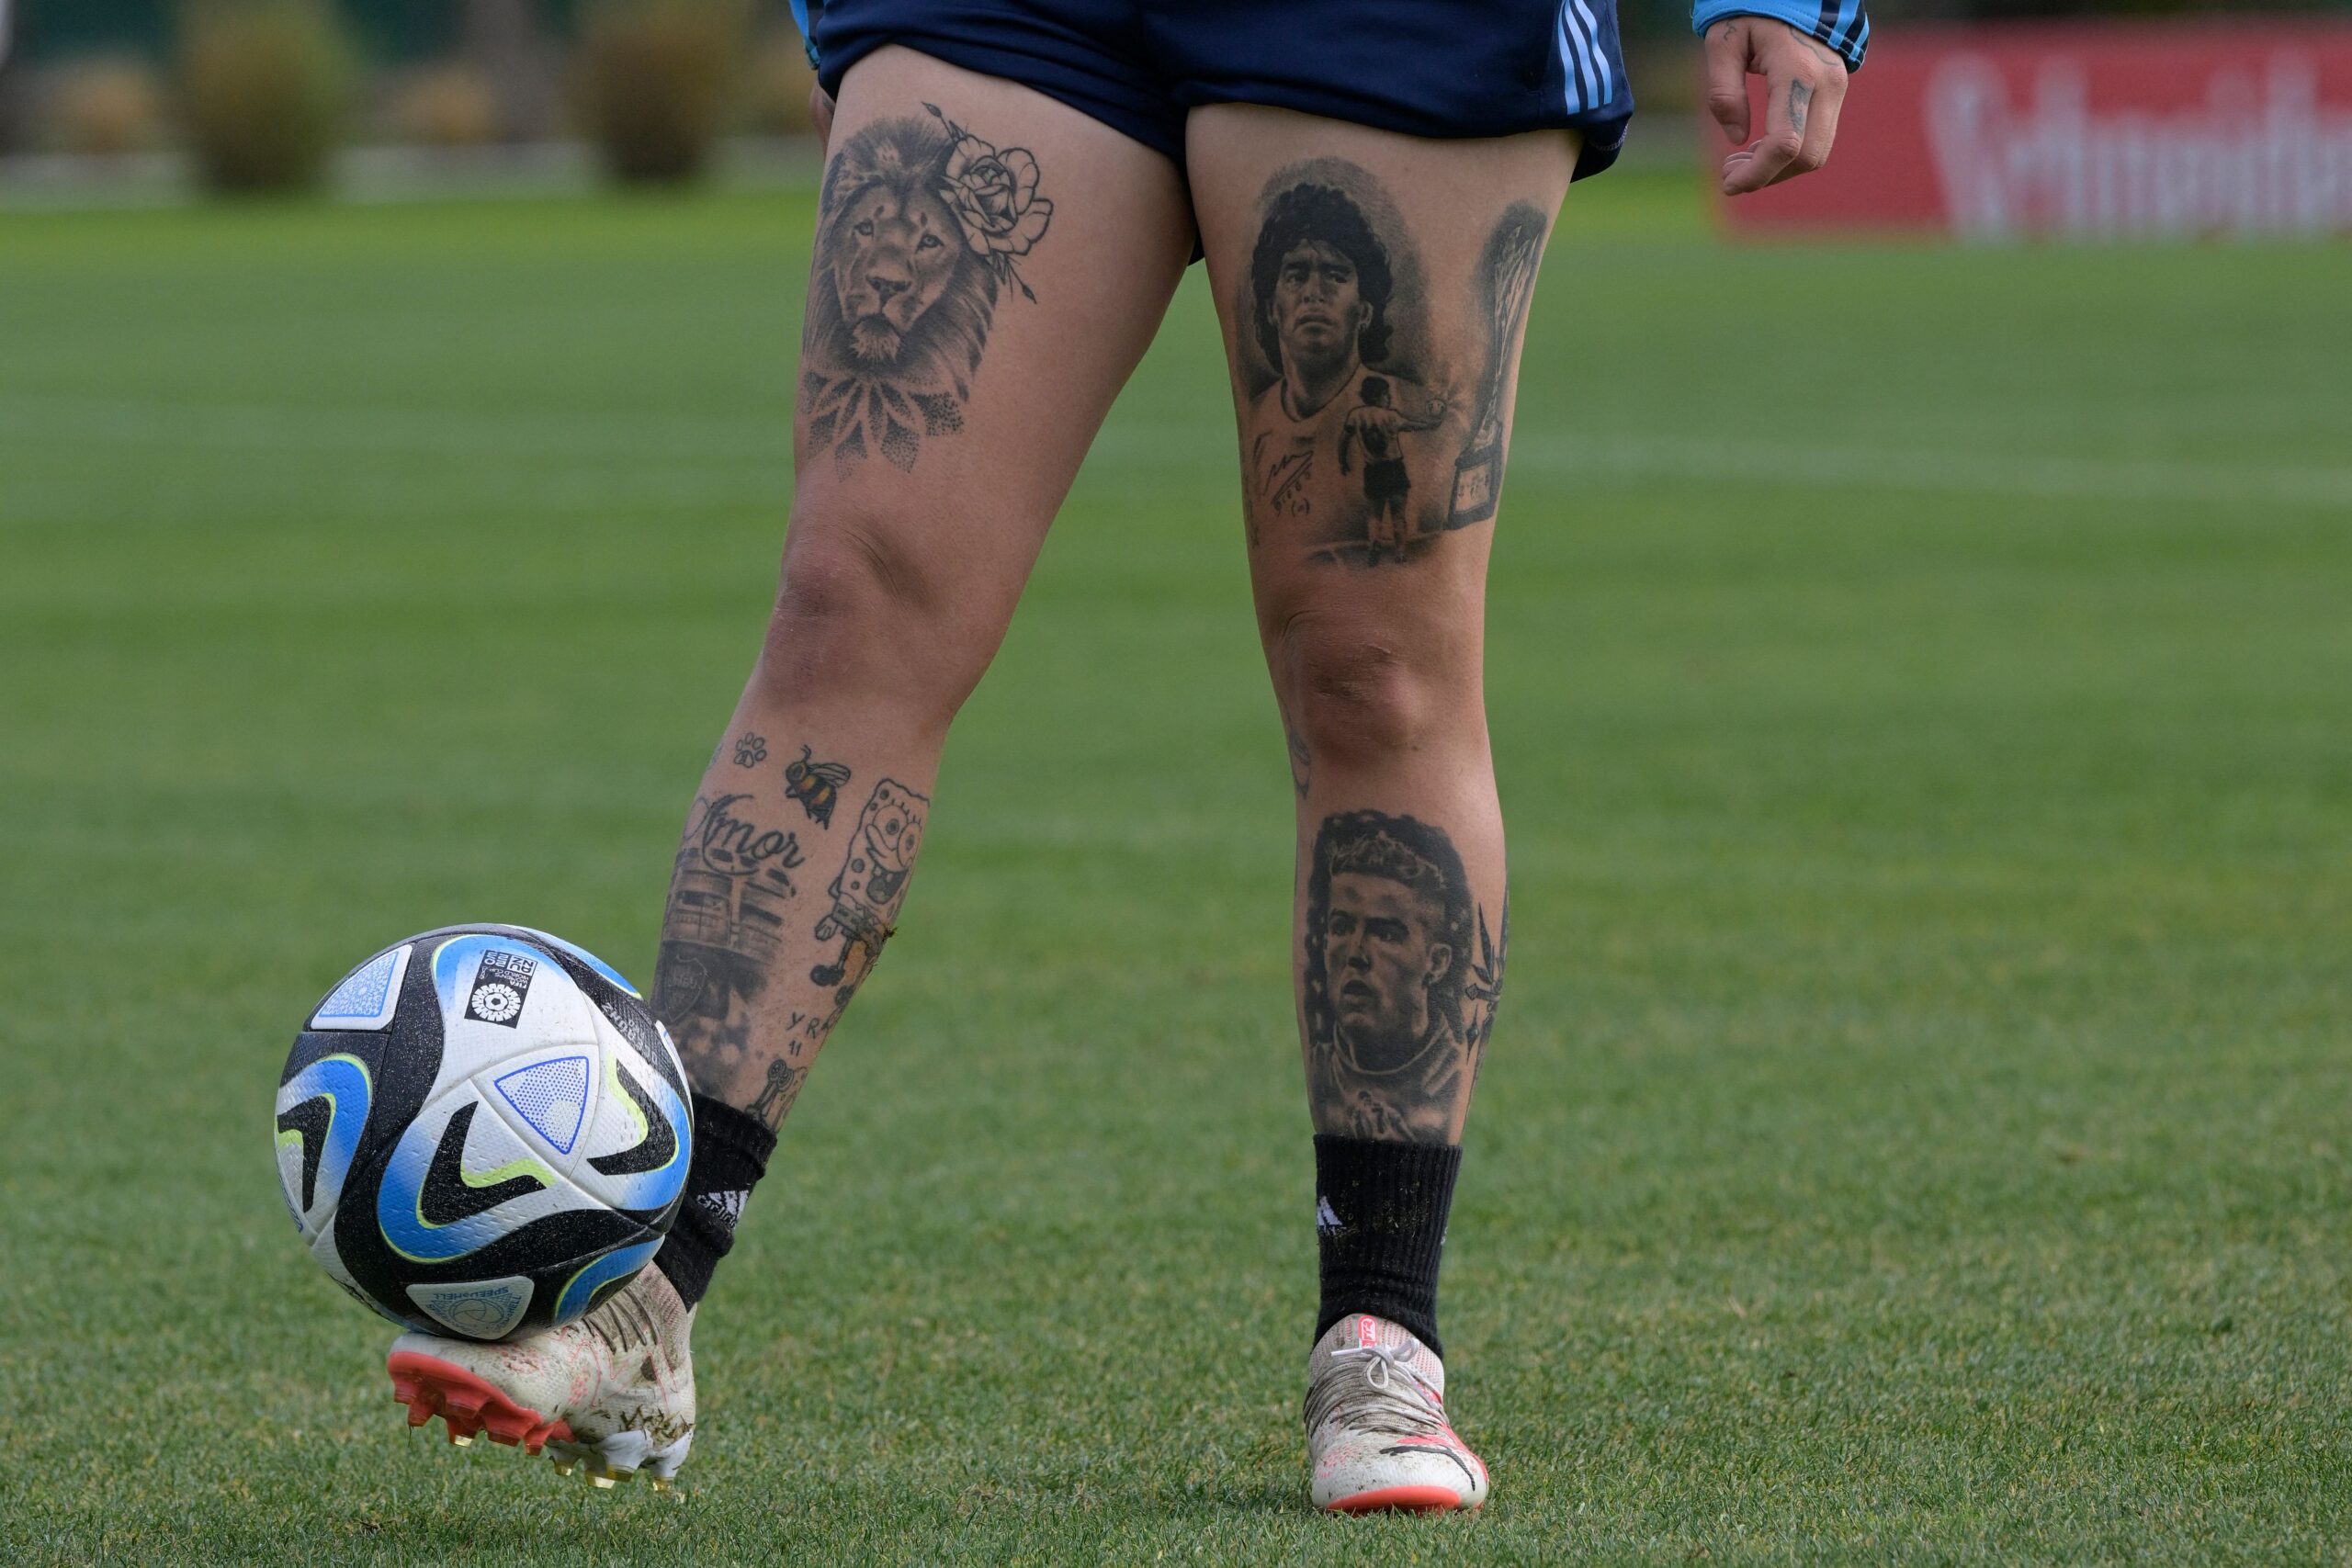 argentine-soccer-player-is-strongly-criticized-for-having-a-tattoo-of-cristiano-ronaldo-on-his-leg